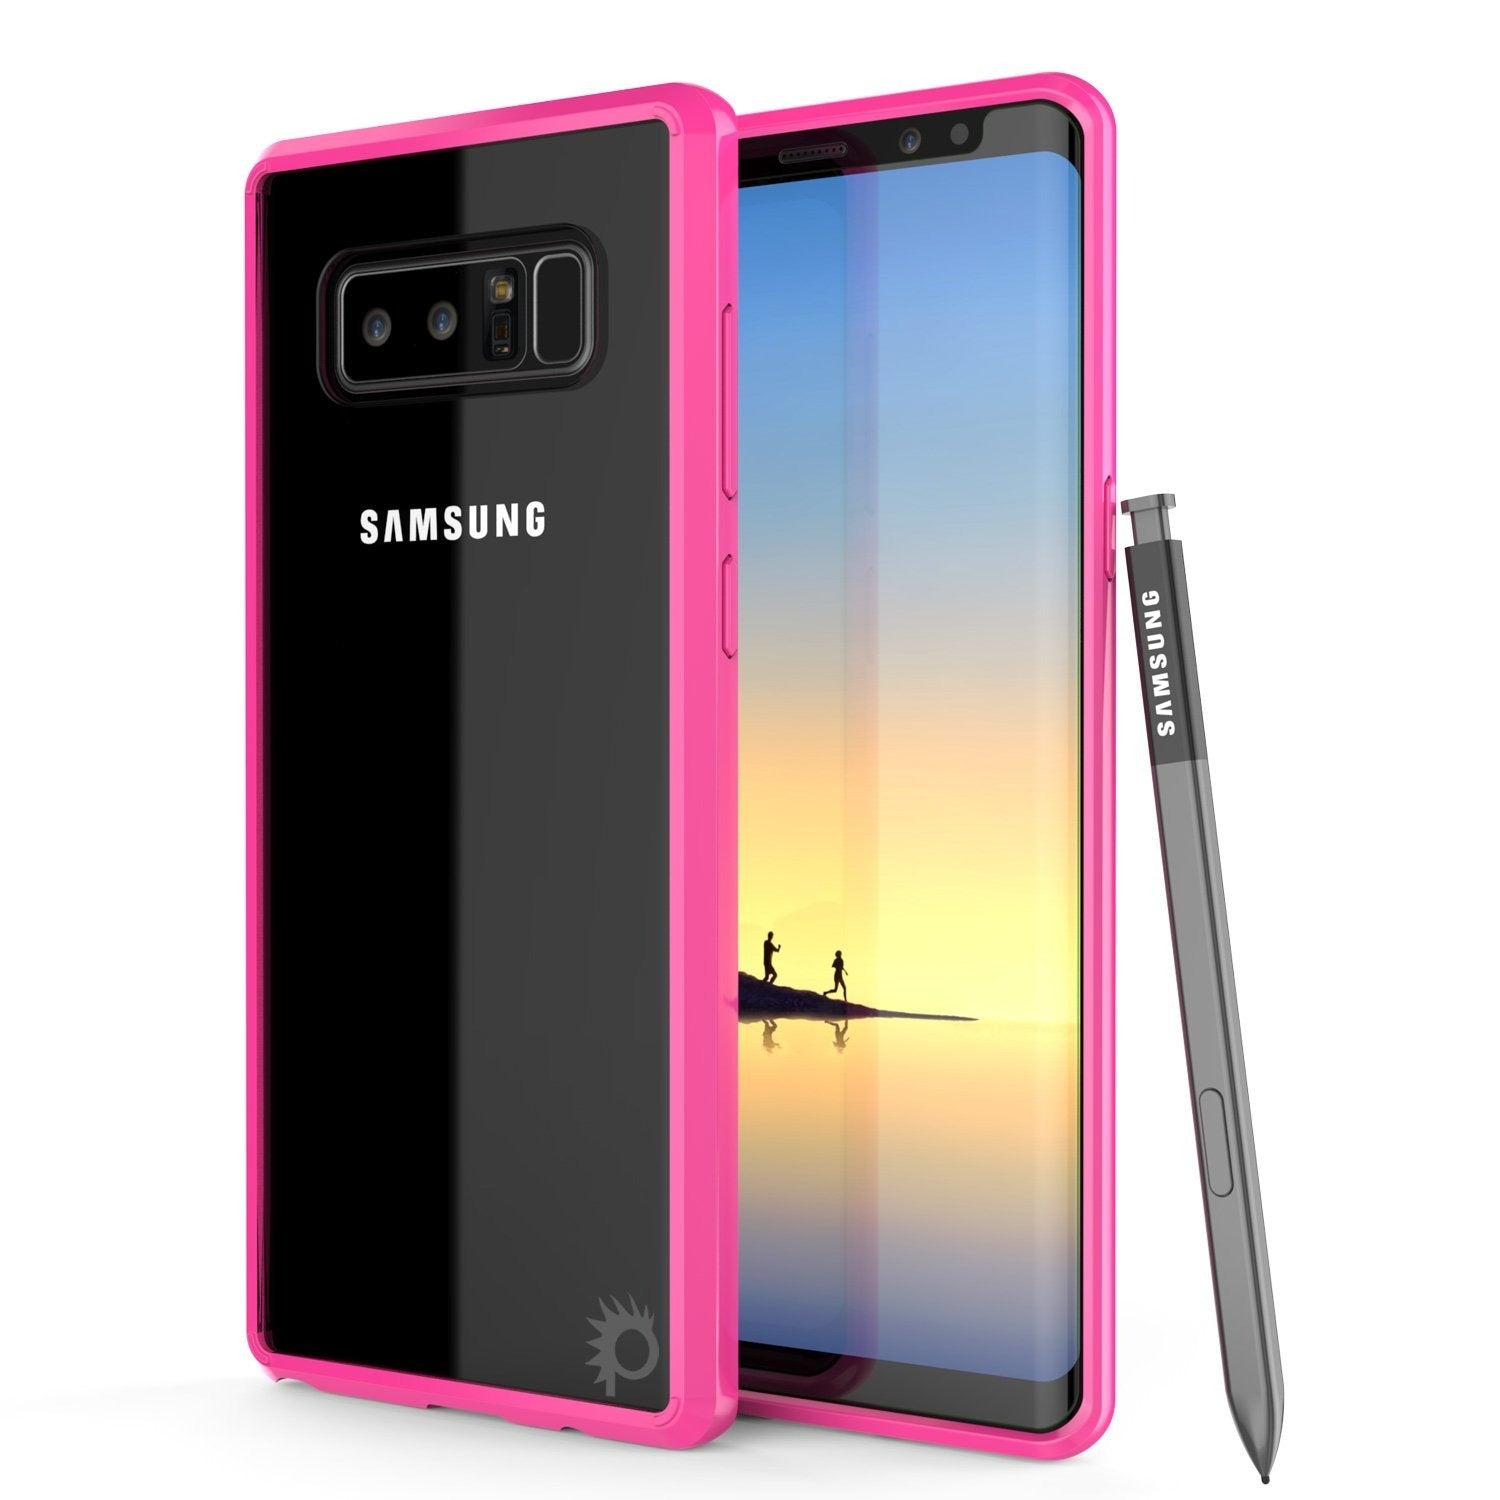 Galaxy Note 8 Case, PUNKcase [LUCID 2.0 Series] [Slim Fit] Armor Cover w/Integrated Anti-Shock System & PUNKSHIELD Screen Protector [Pink]